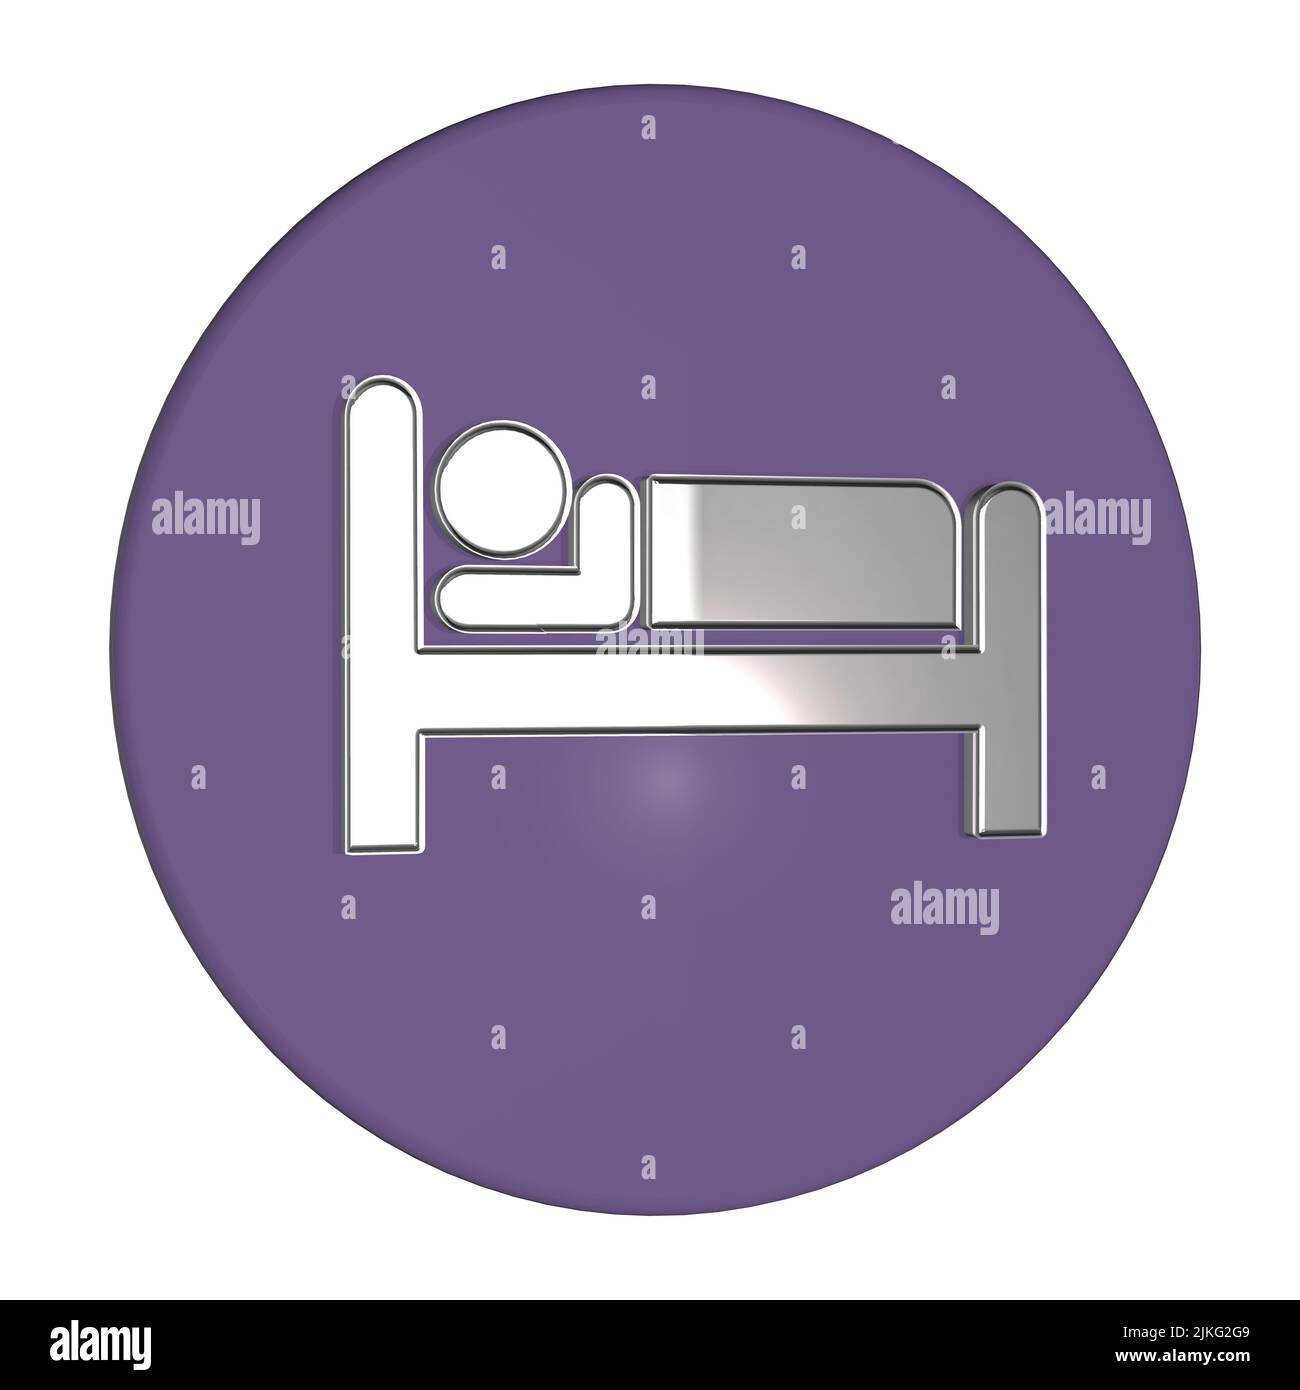 graphic design logo of sleep sleeping concept figure in bed asleep part of healthy lifestyle concept Stock Photo